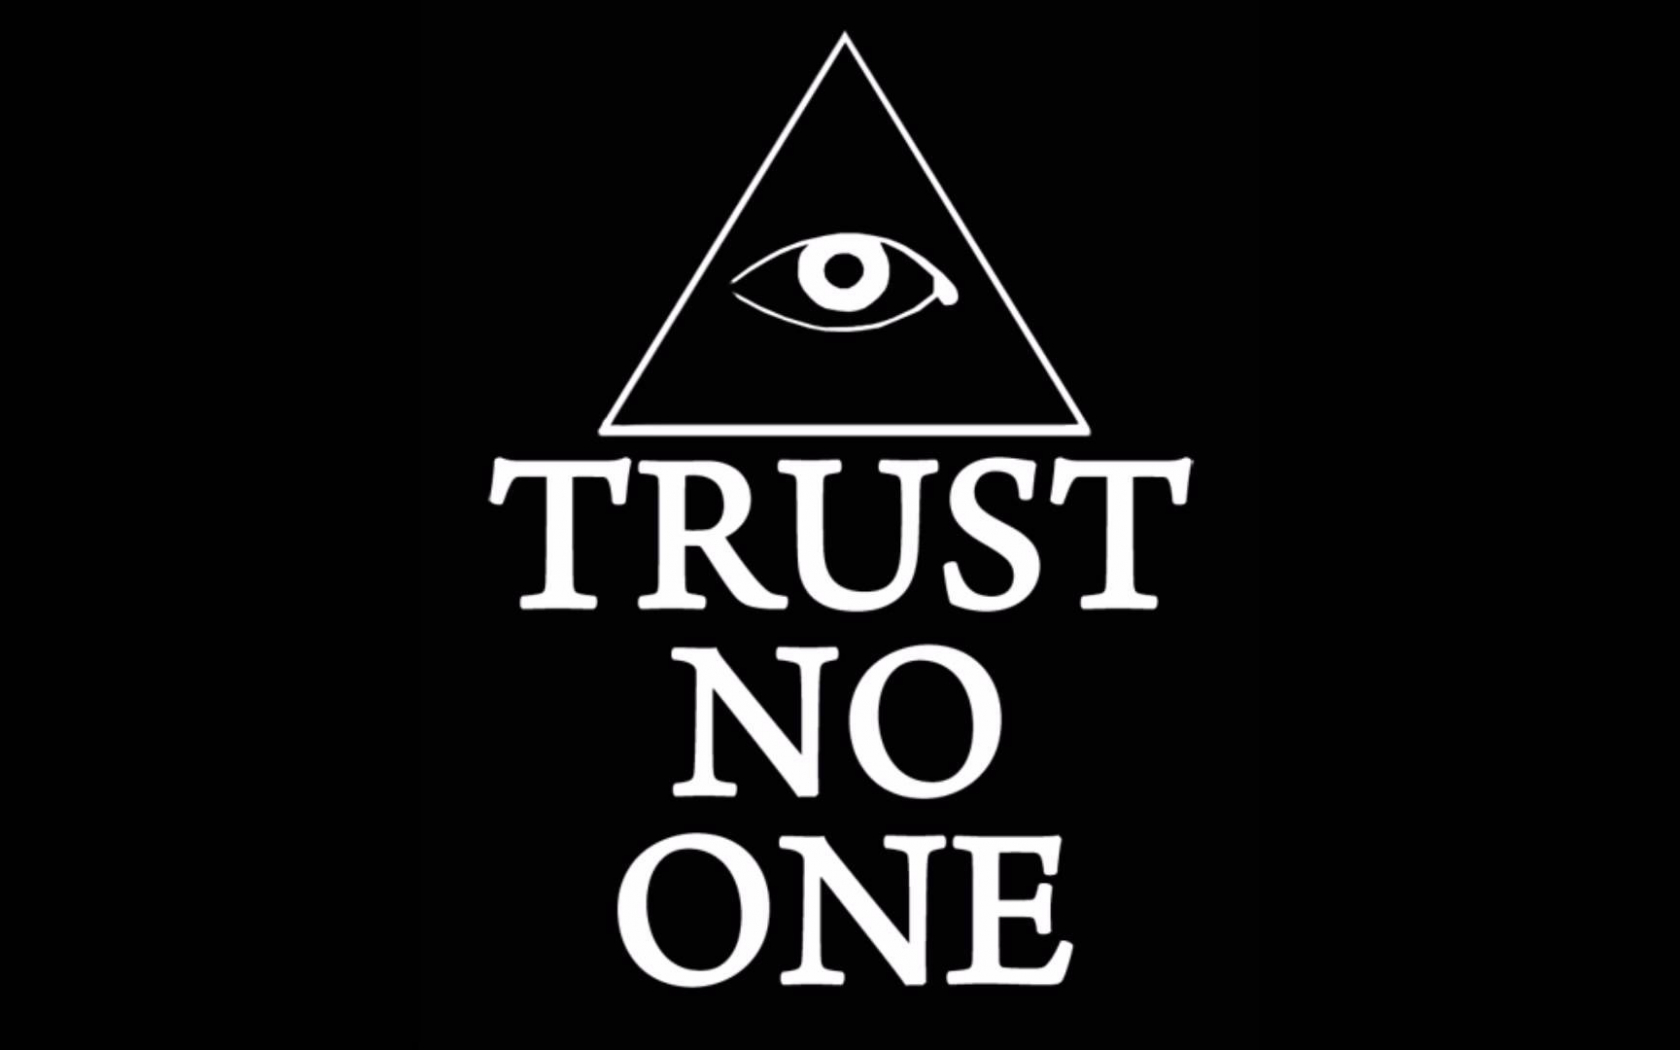 Trust No One Wallpapers